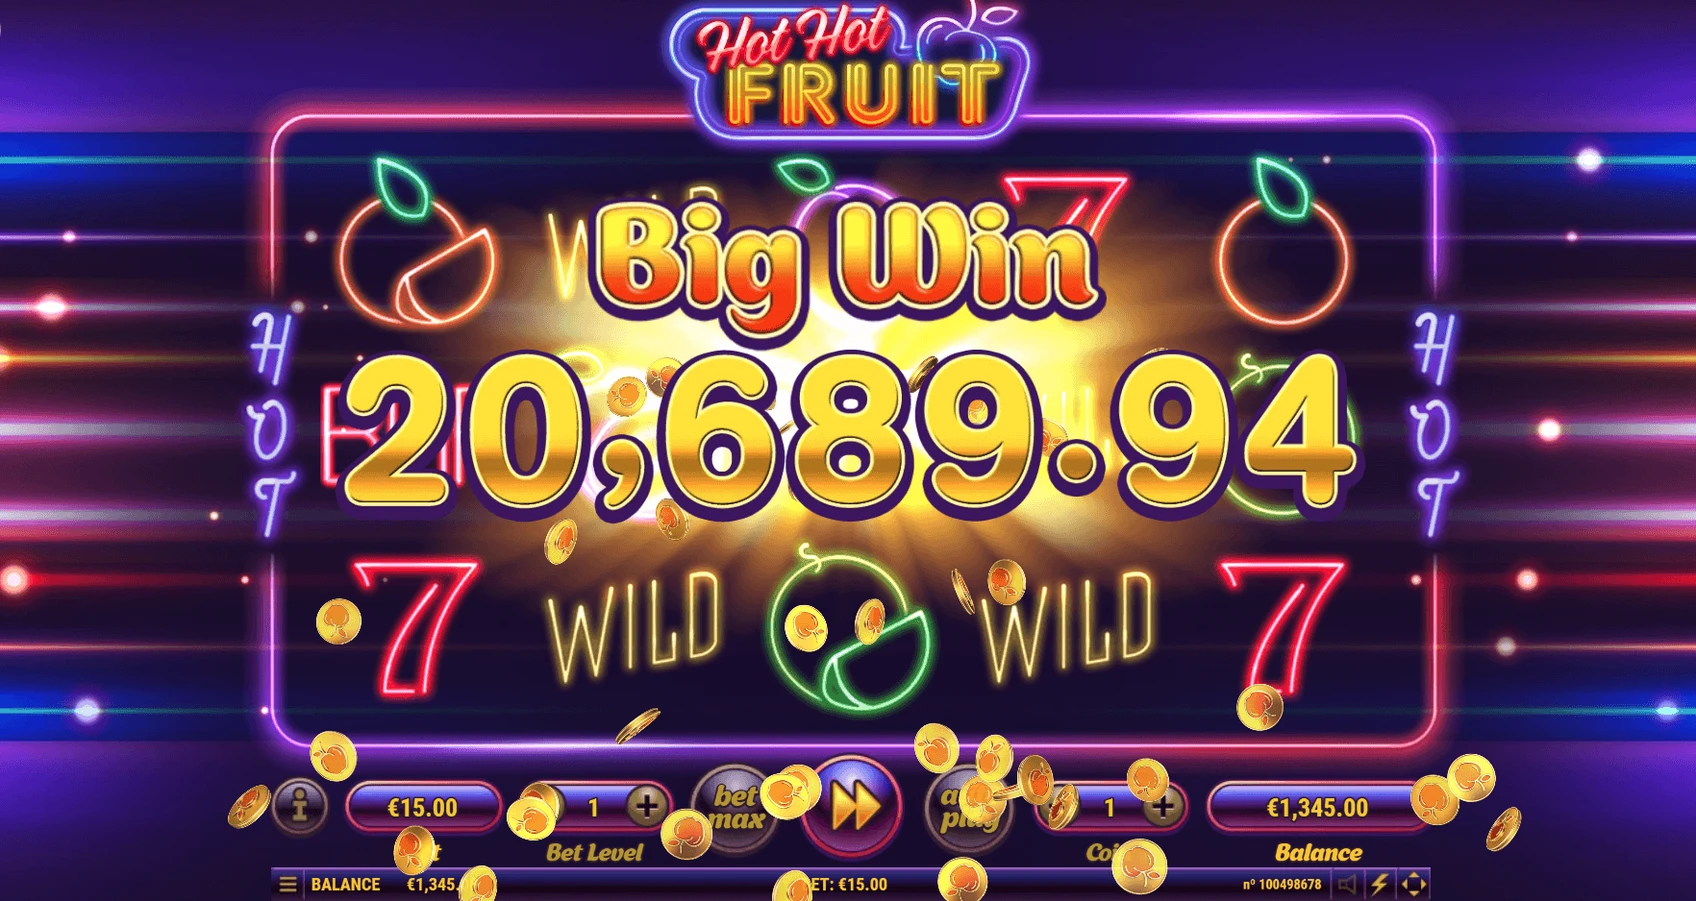 Hot Hot Fruit is an exciting slot machine with engaging gameplay